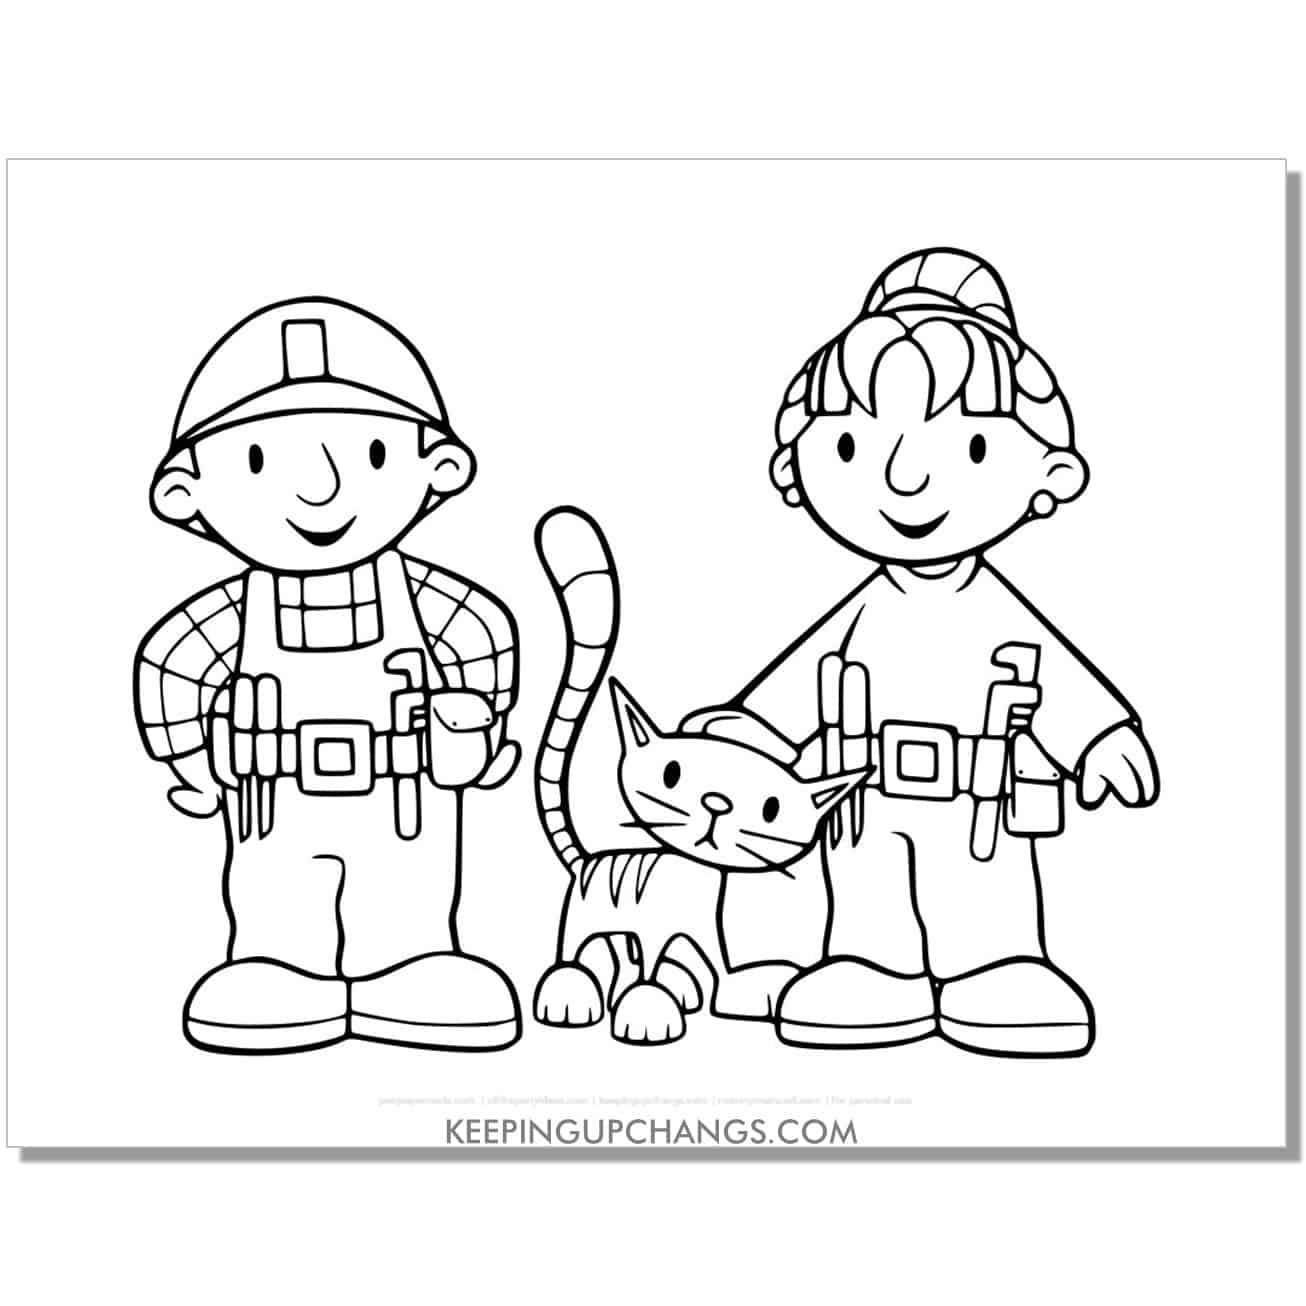 free bob the builder, pilchard cat, wendy partner coloring page, sheet.